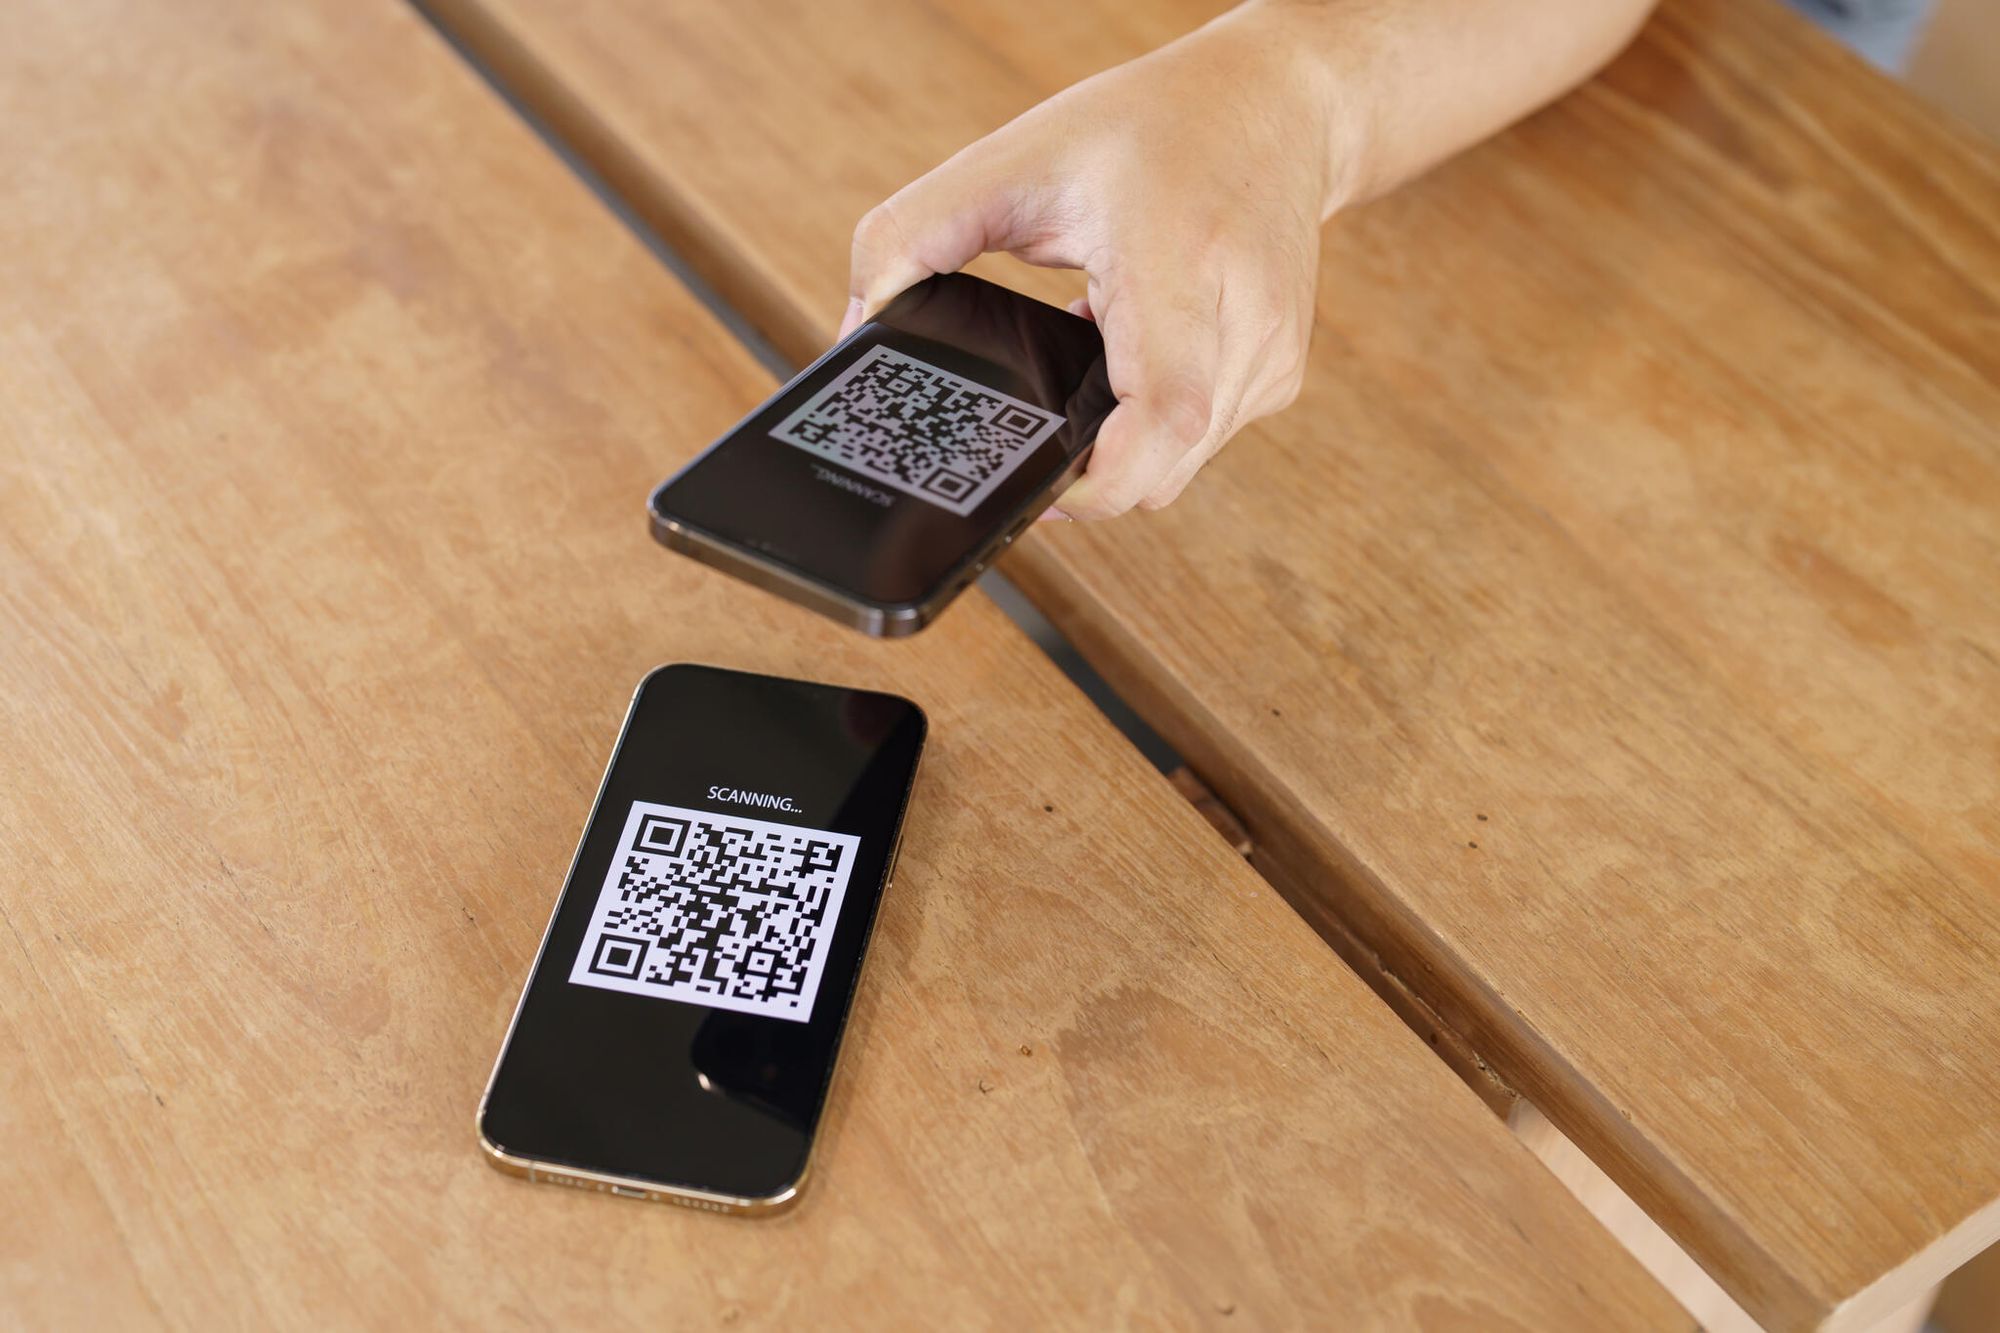 a phone scanning a QR code on another phone on a wooden table